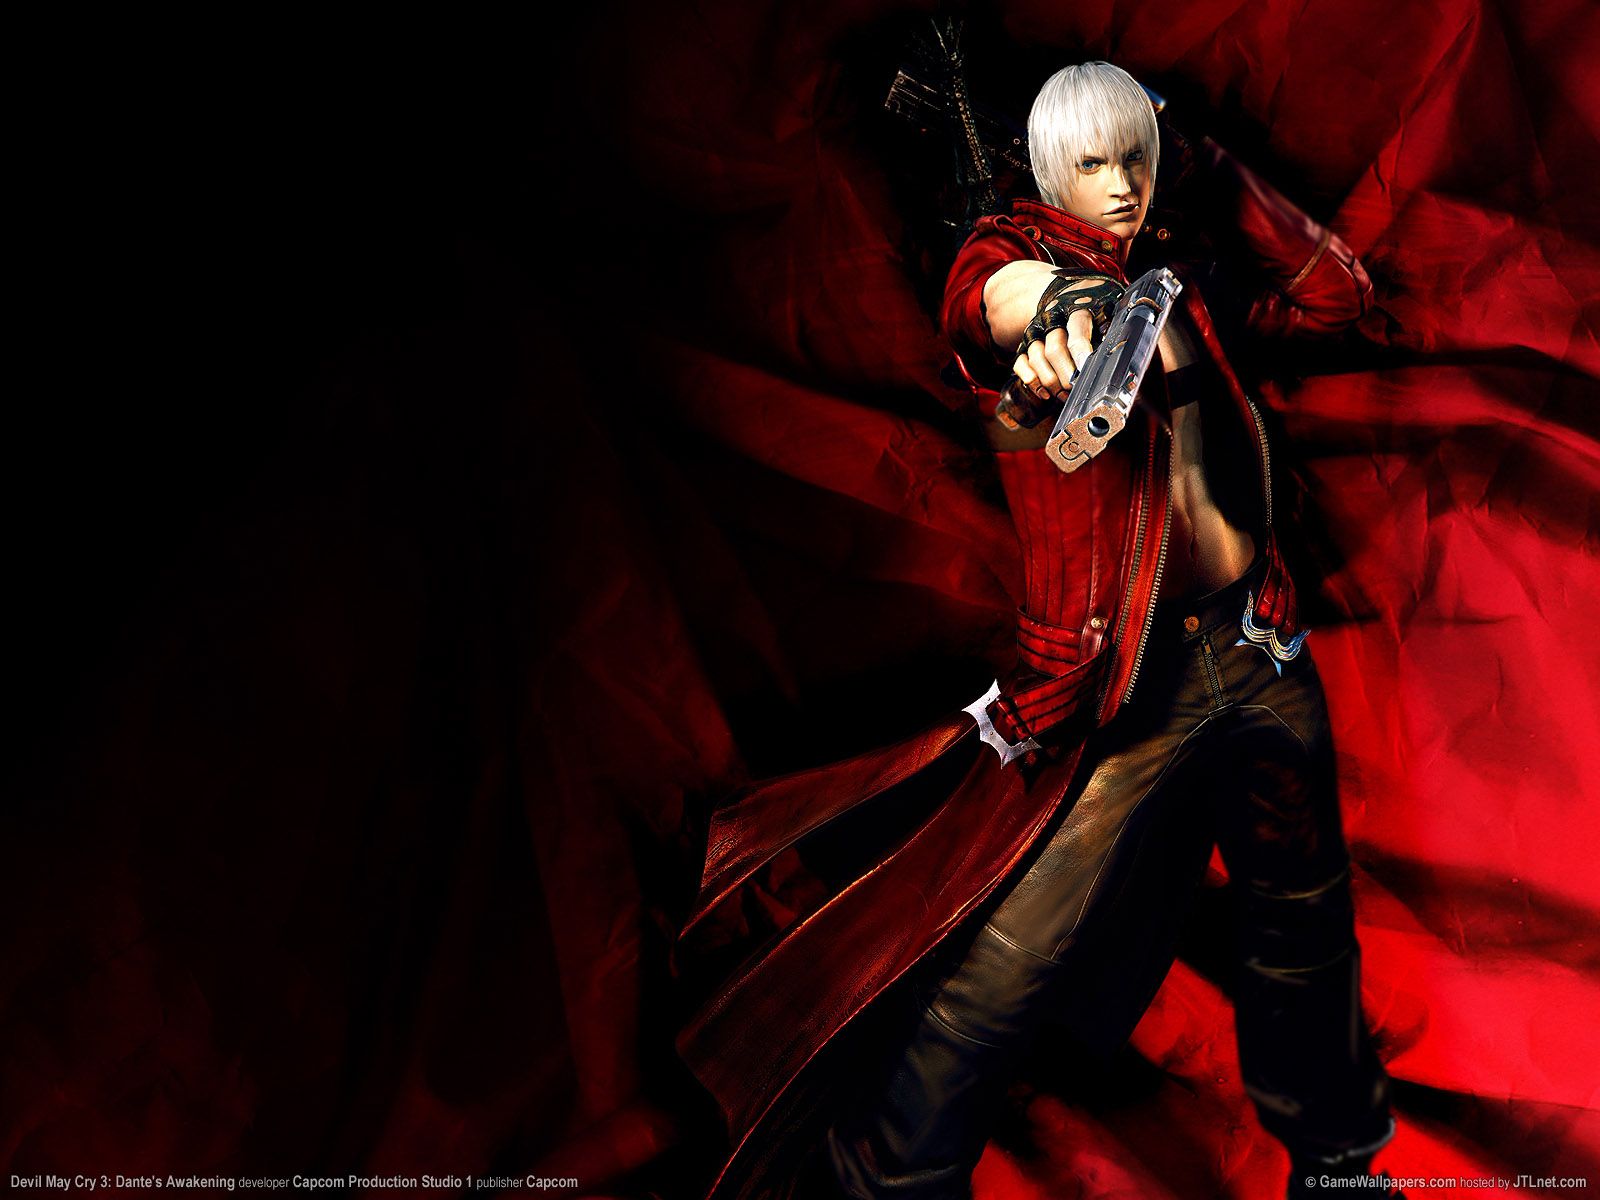 Devil May Cry 3 wallpapers Devil May Cry 3 stock photos